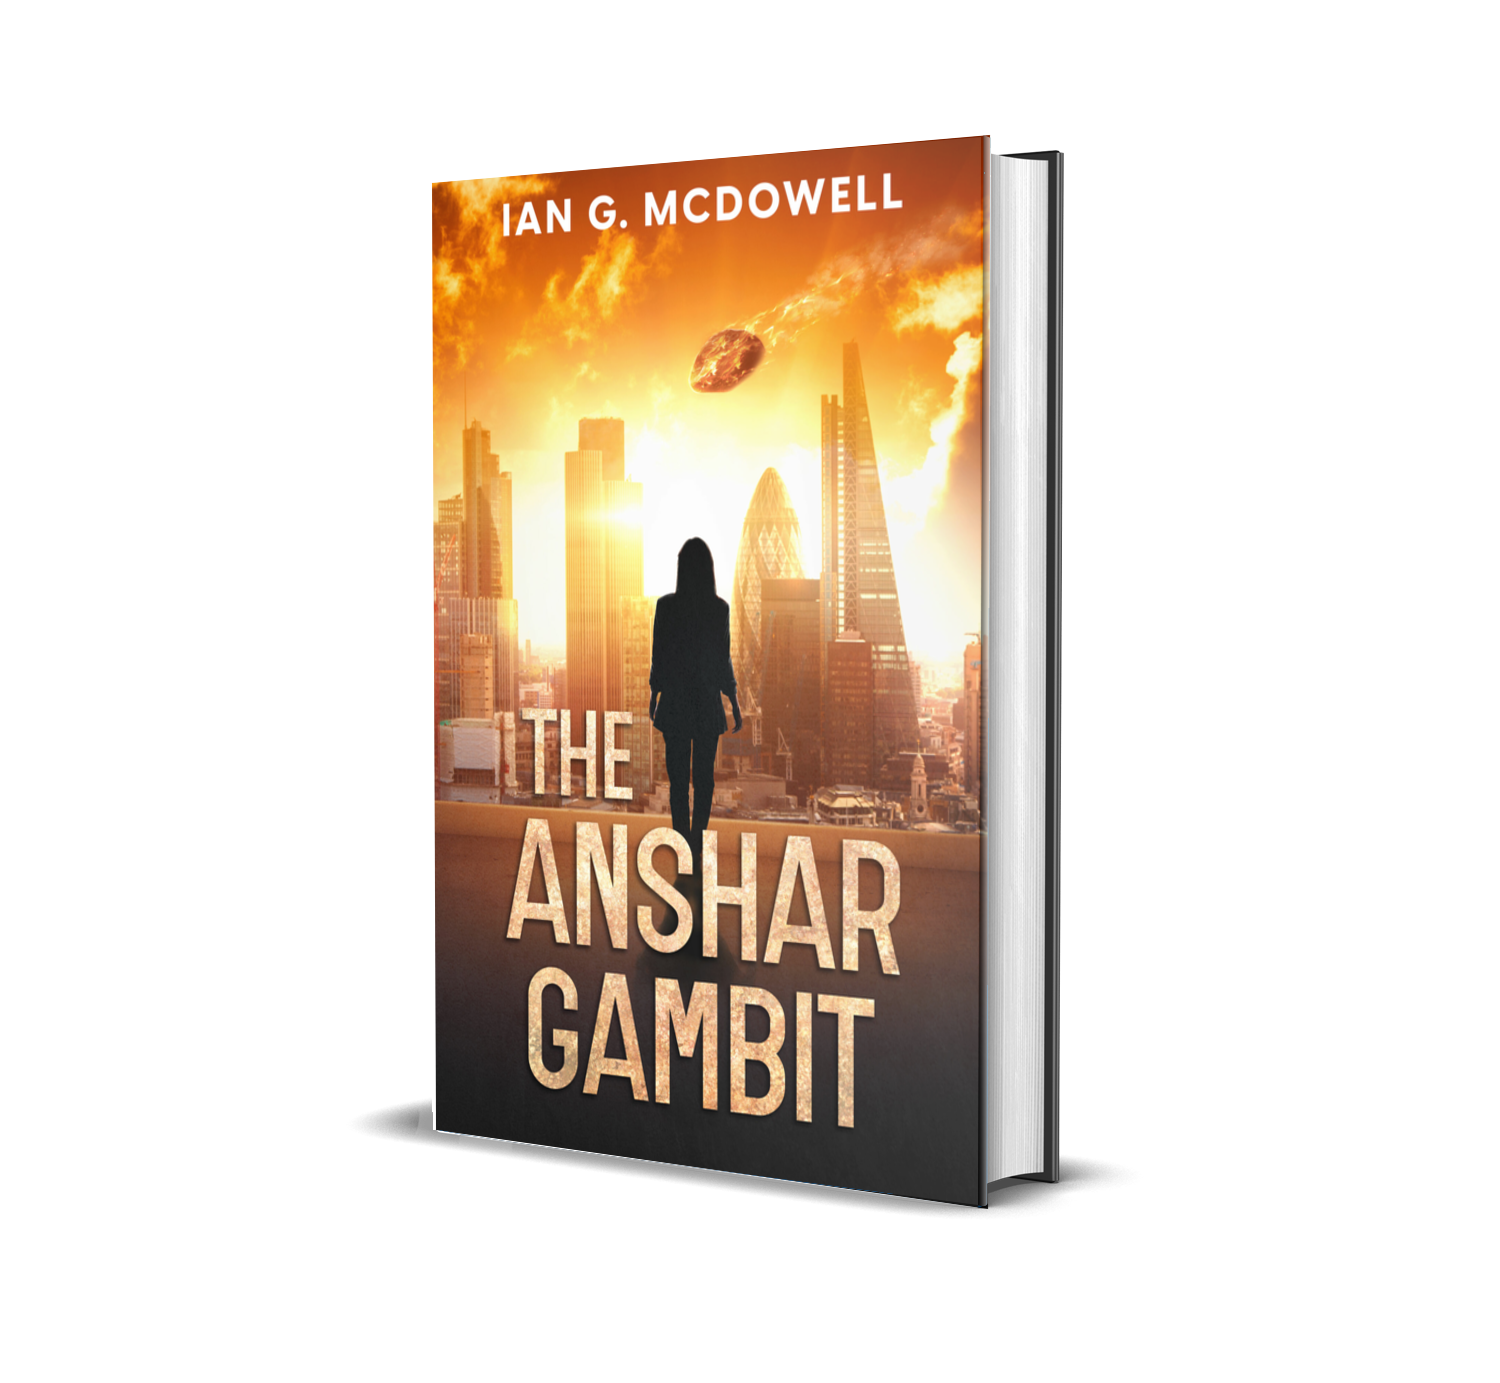 The Anshar Gambit book cover